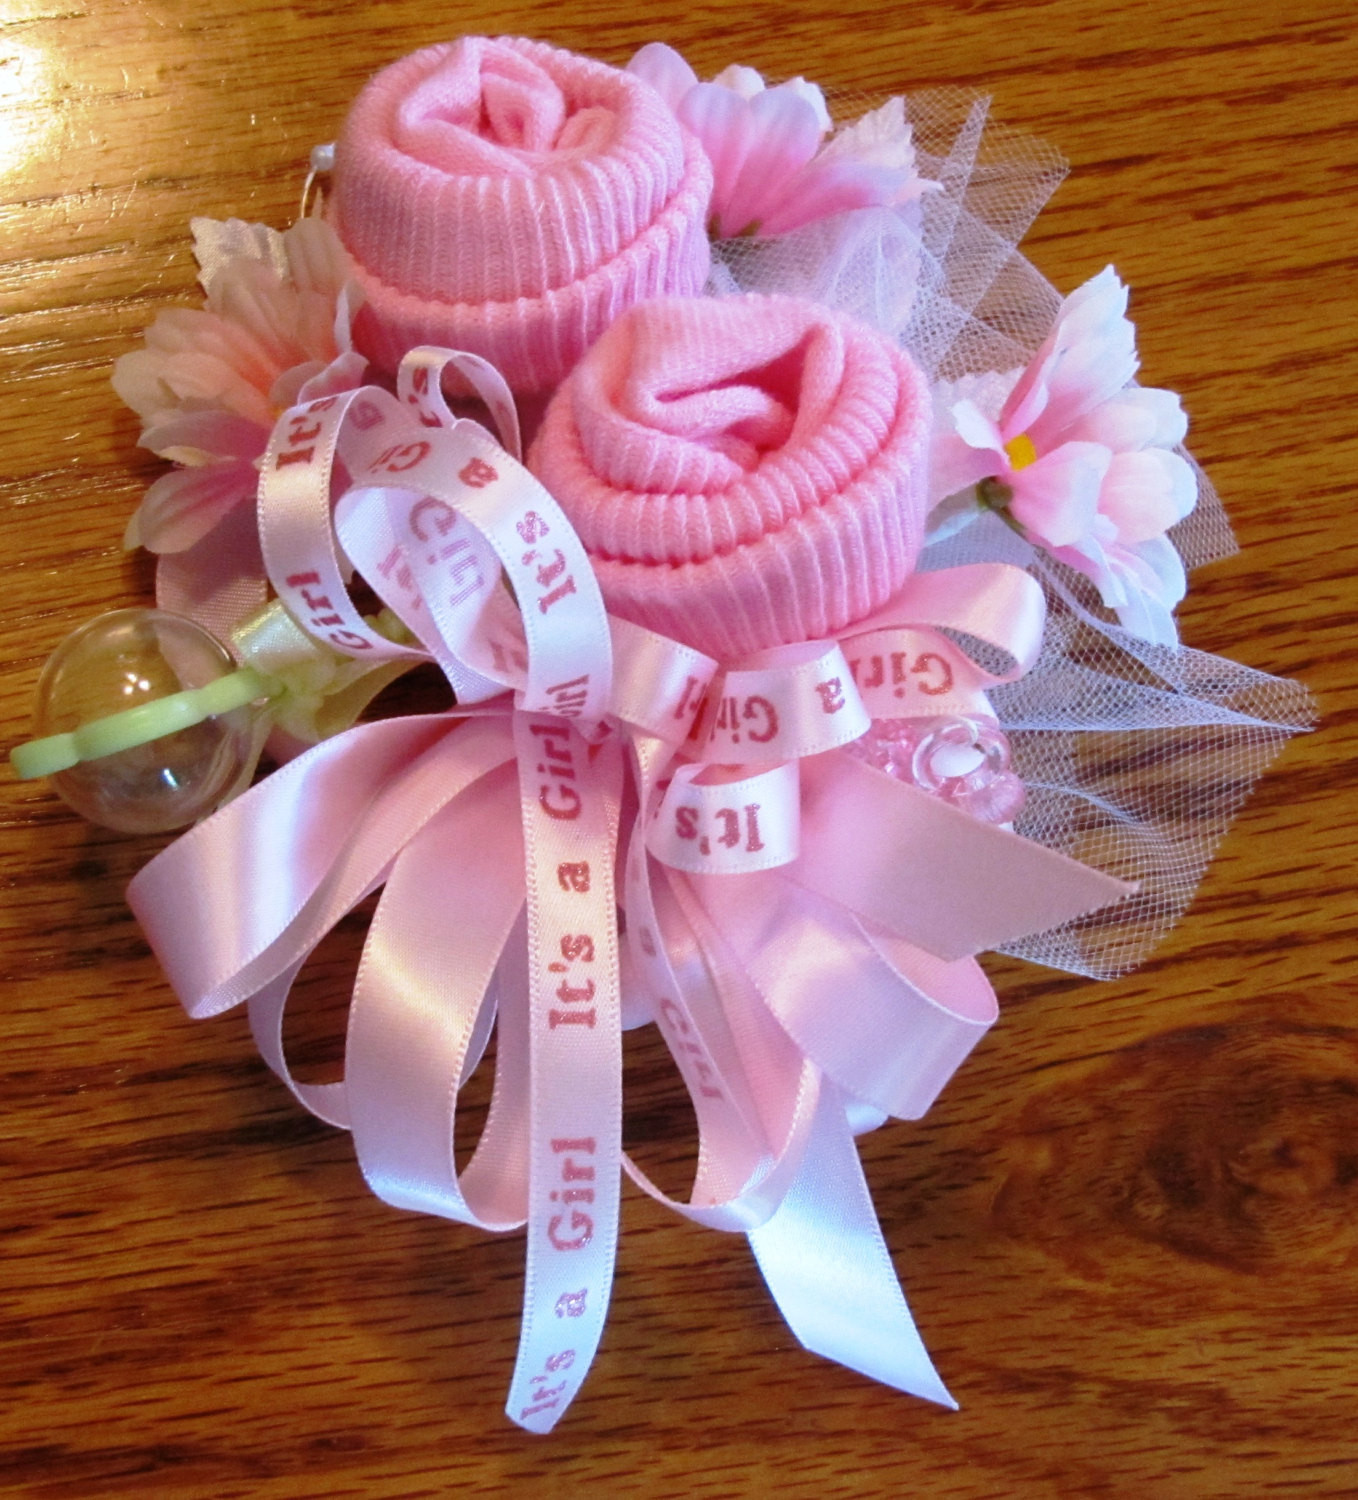 Baby Shower Corsage DIY
 The Best Baby Shower Corsages Diy Home Inspiration and